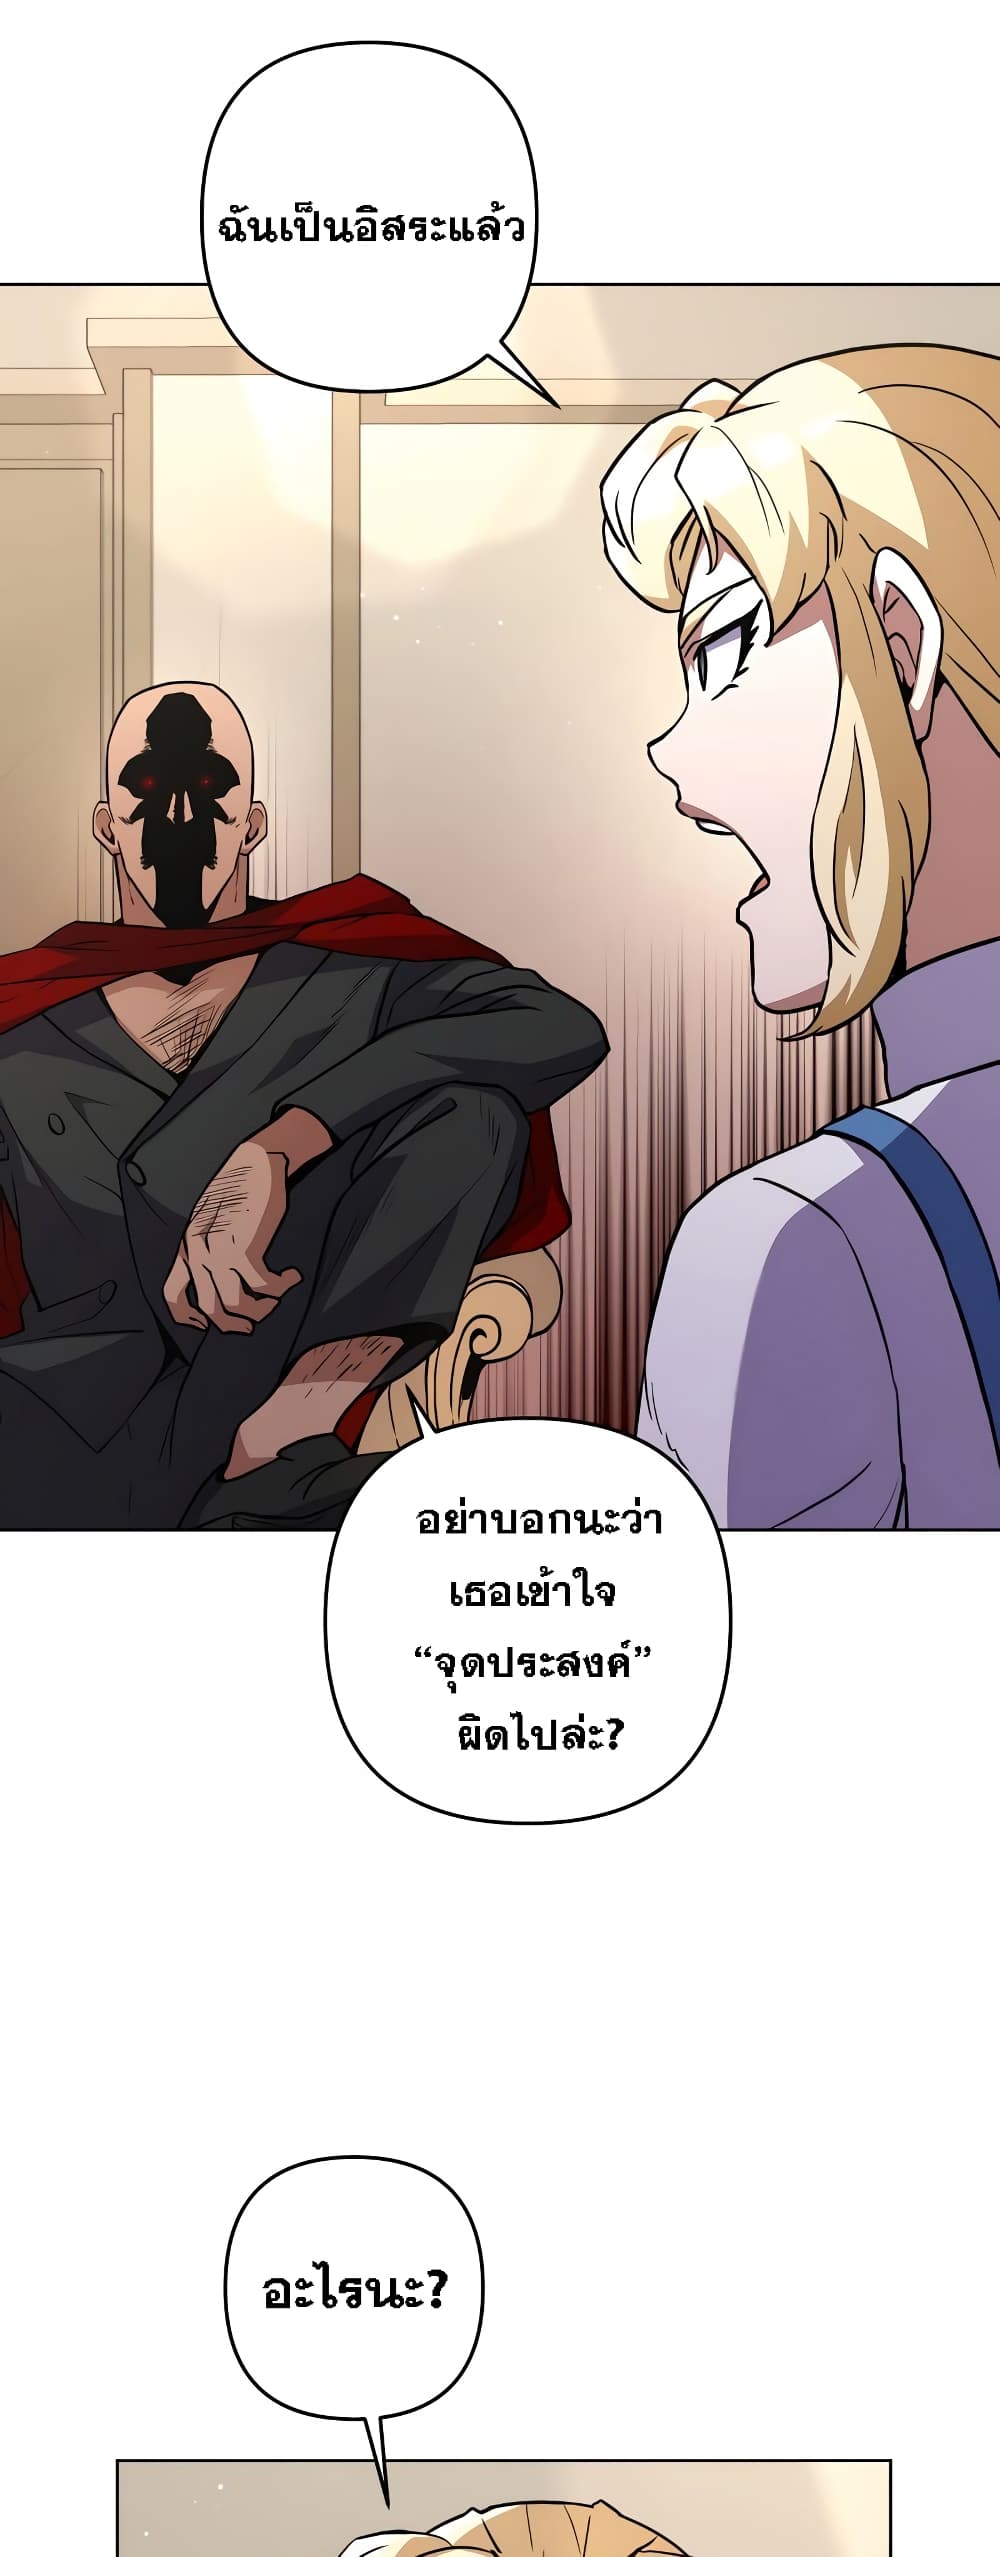 Surviving in an Action Manhwa 9-9